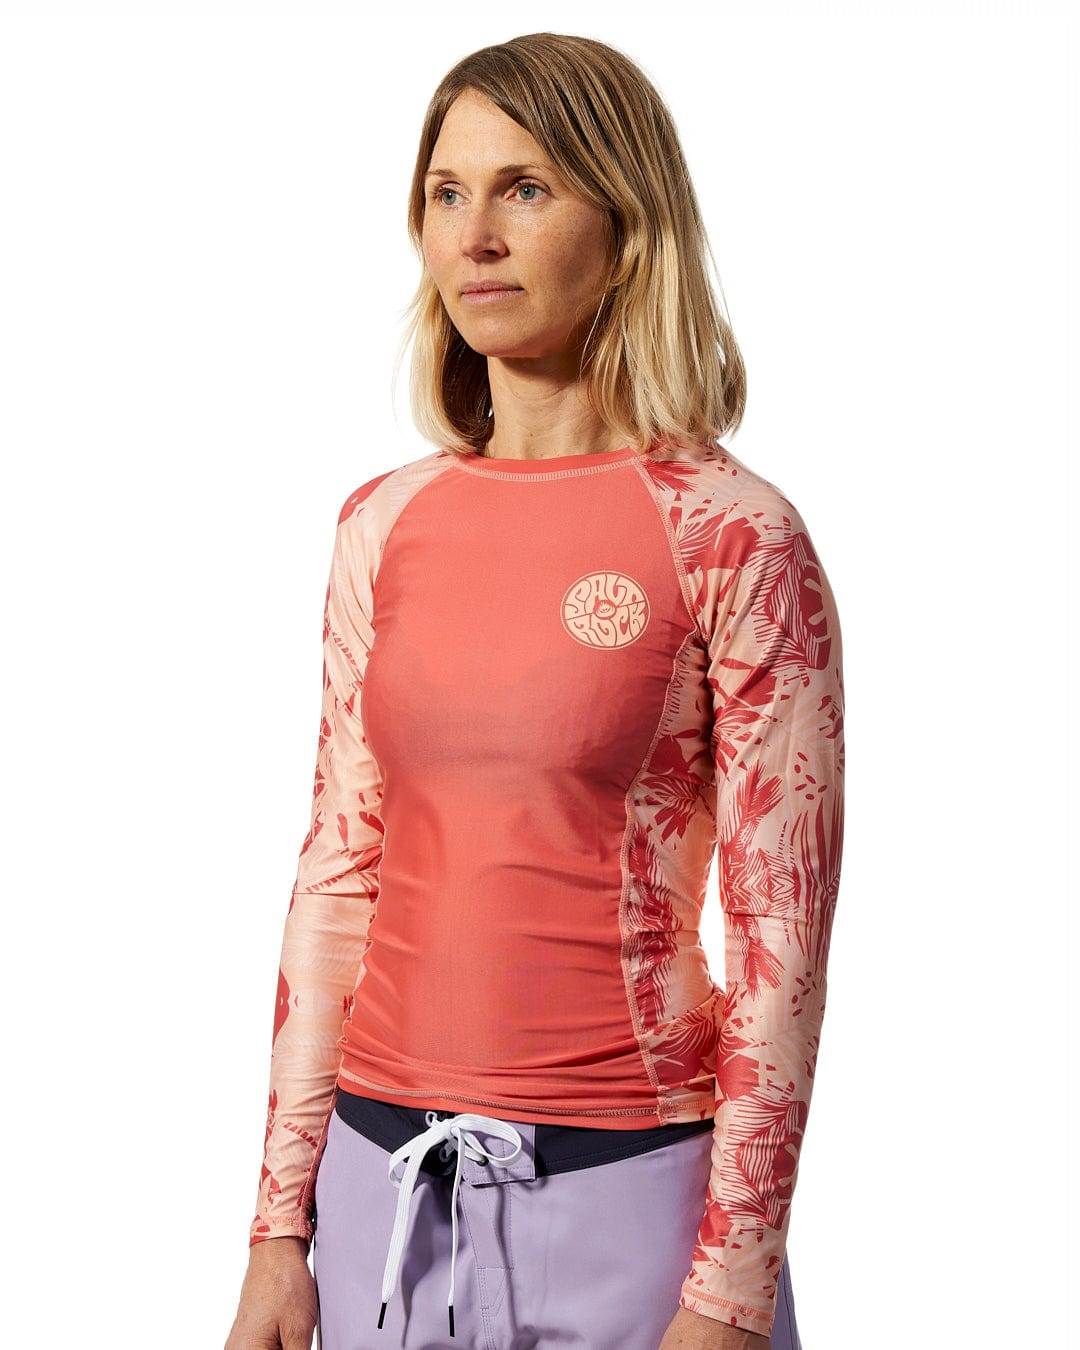 A woman wearing a Coraline - Womens Long Sleeve Rashvest - Coral from Saltrock.